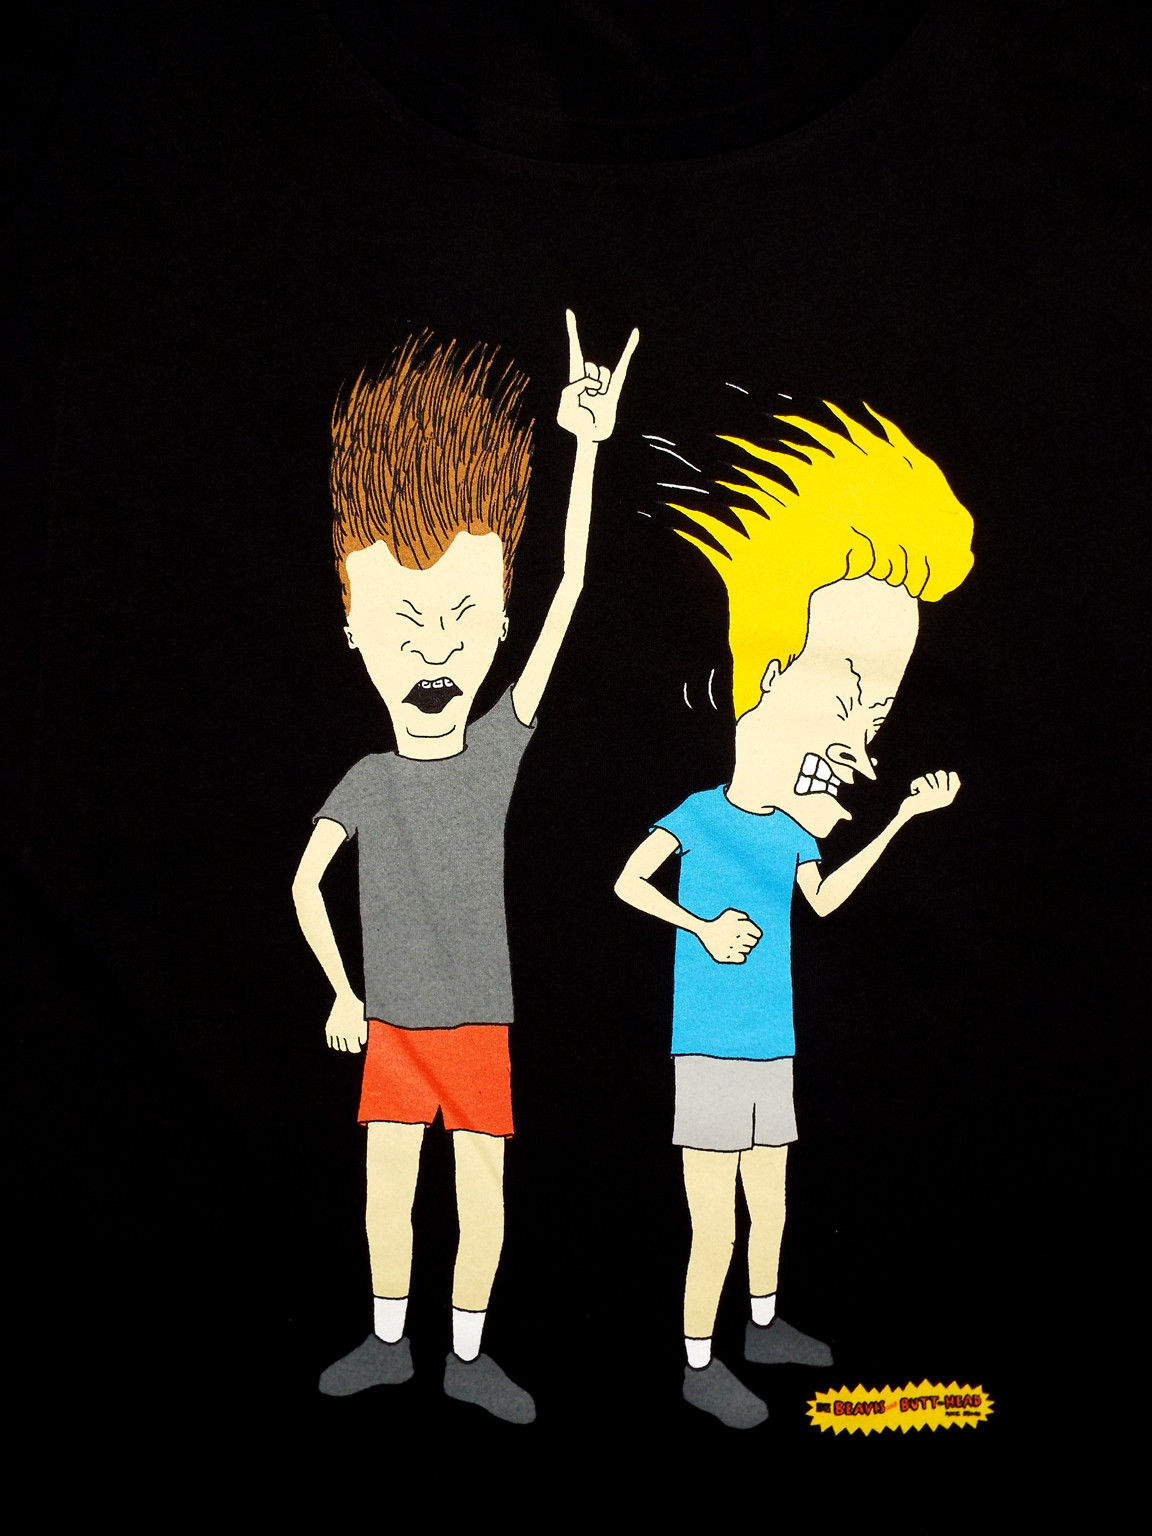 Free download Beavis And Butt Head Cartoon Wallpapers images in